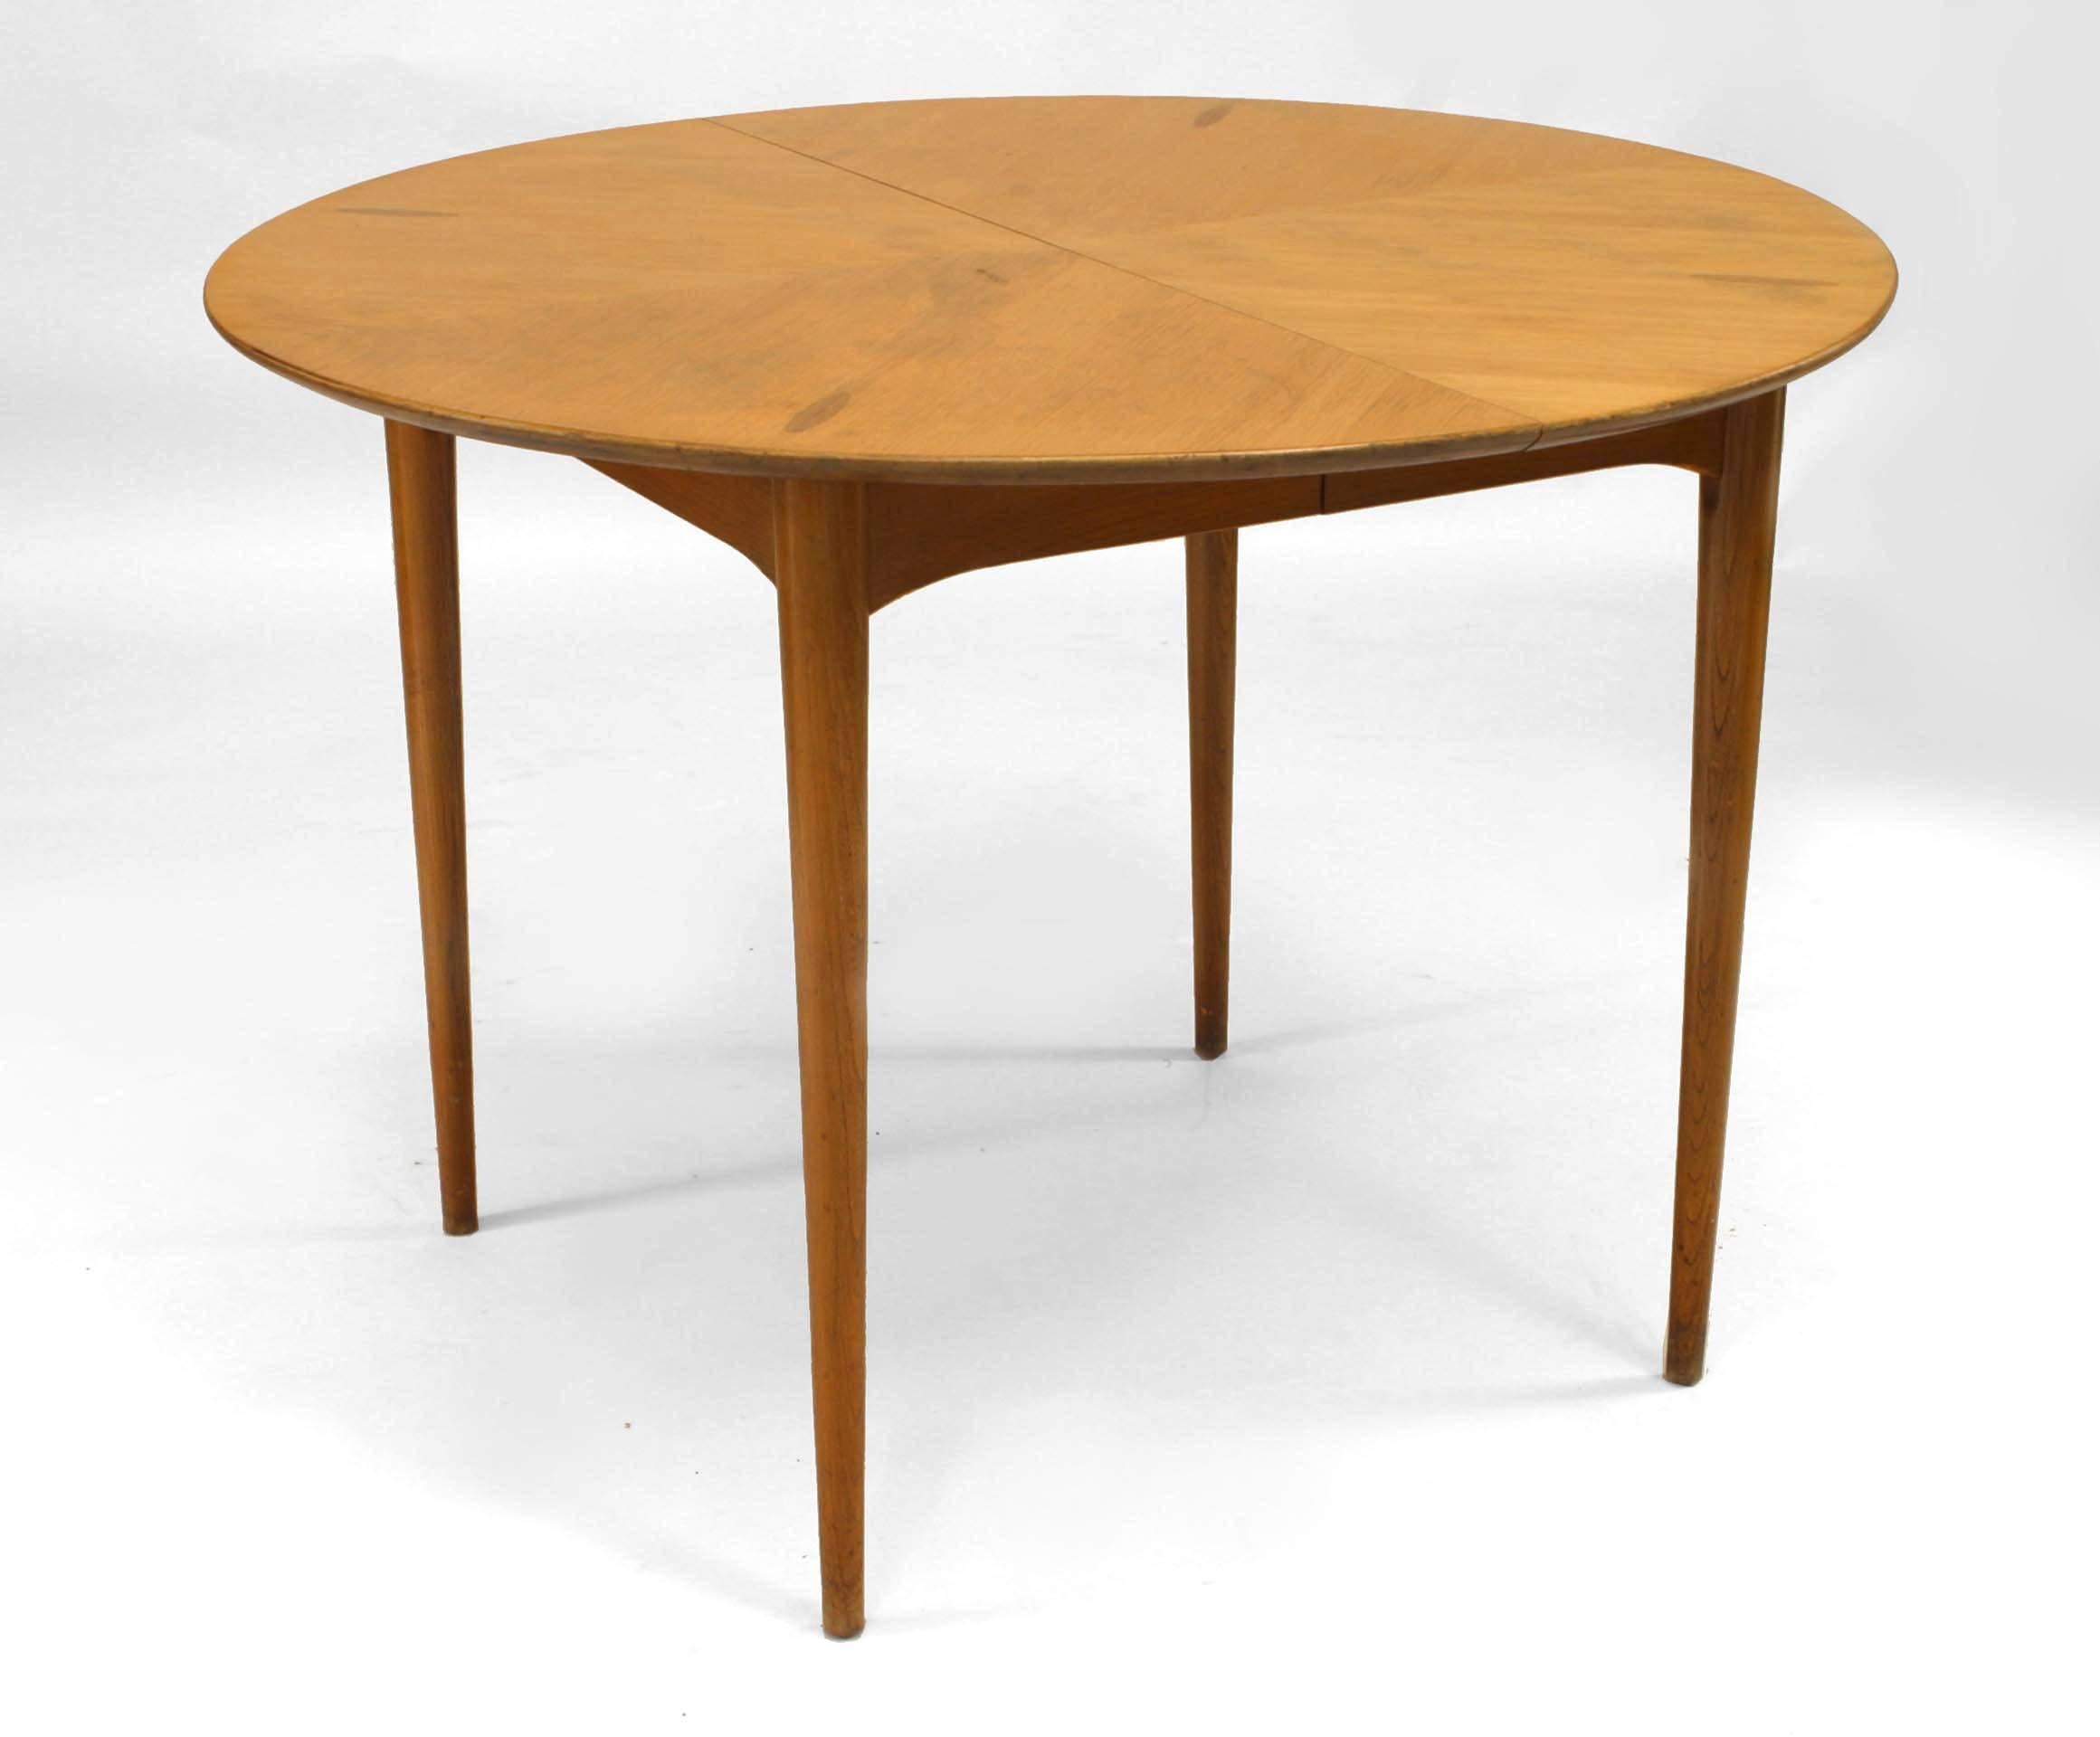 Post-War Design Danish-style (1950s) light wood round dining table with 4 small oval inlaid sections supported on 4 conical form legs (originally had leaves)
